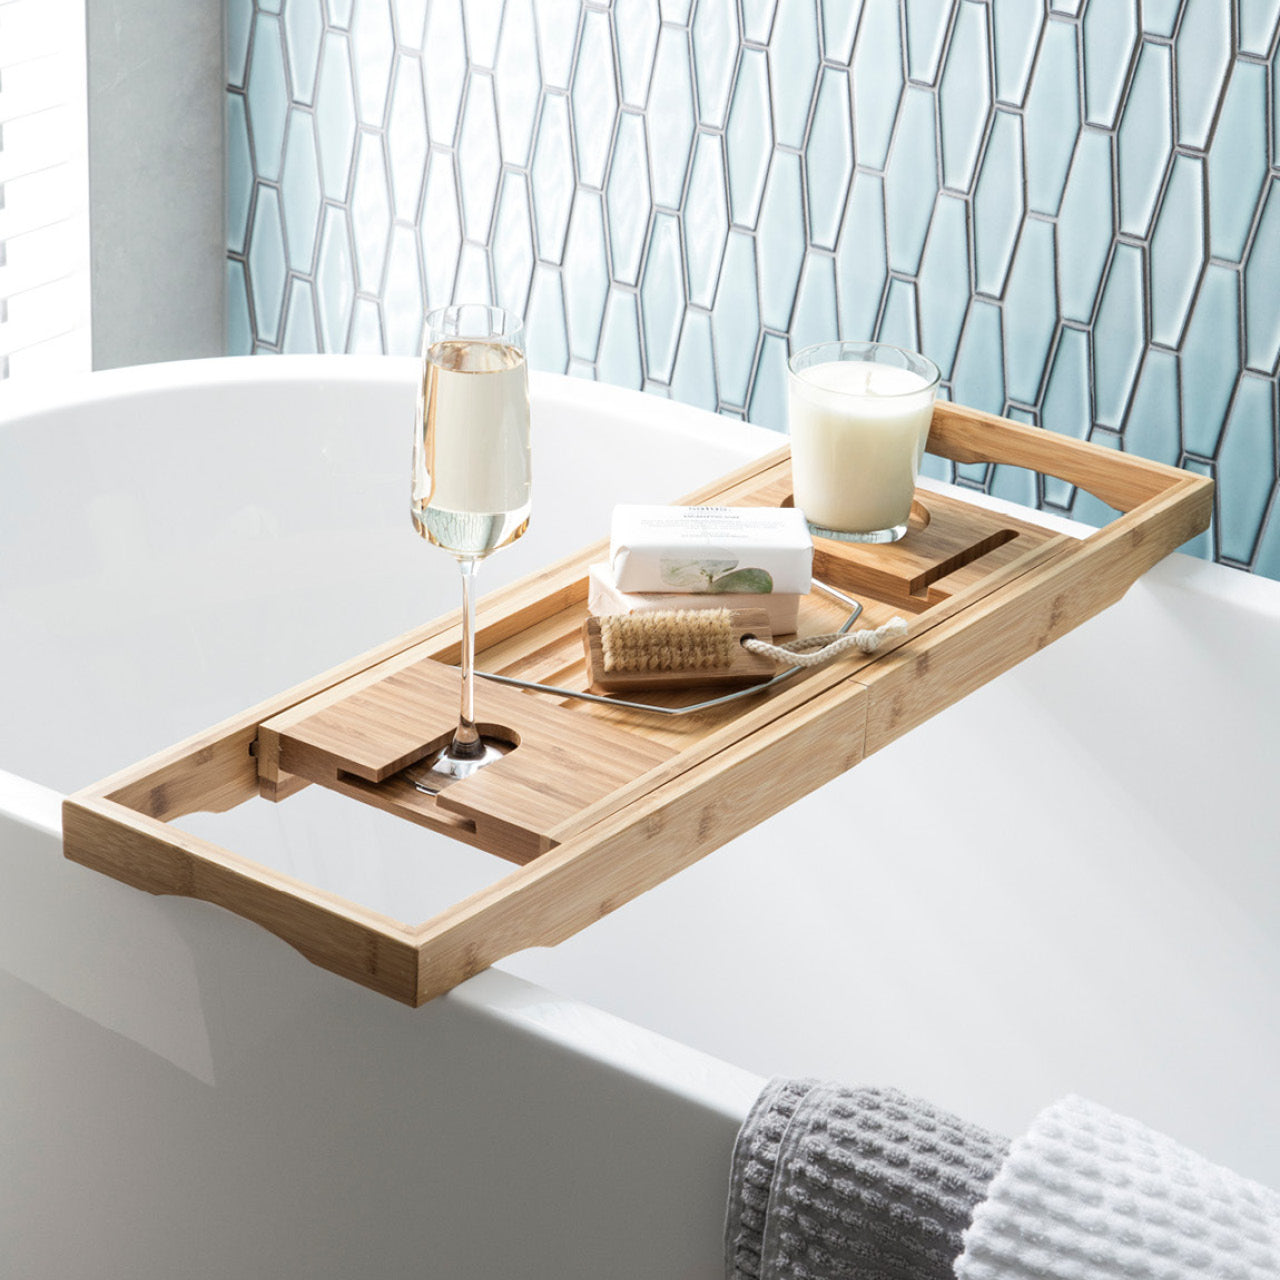 Bamboo Bath Caddy over bath with glass of wine